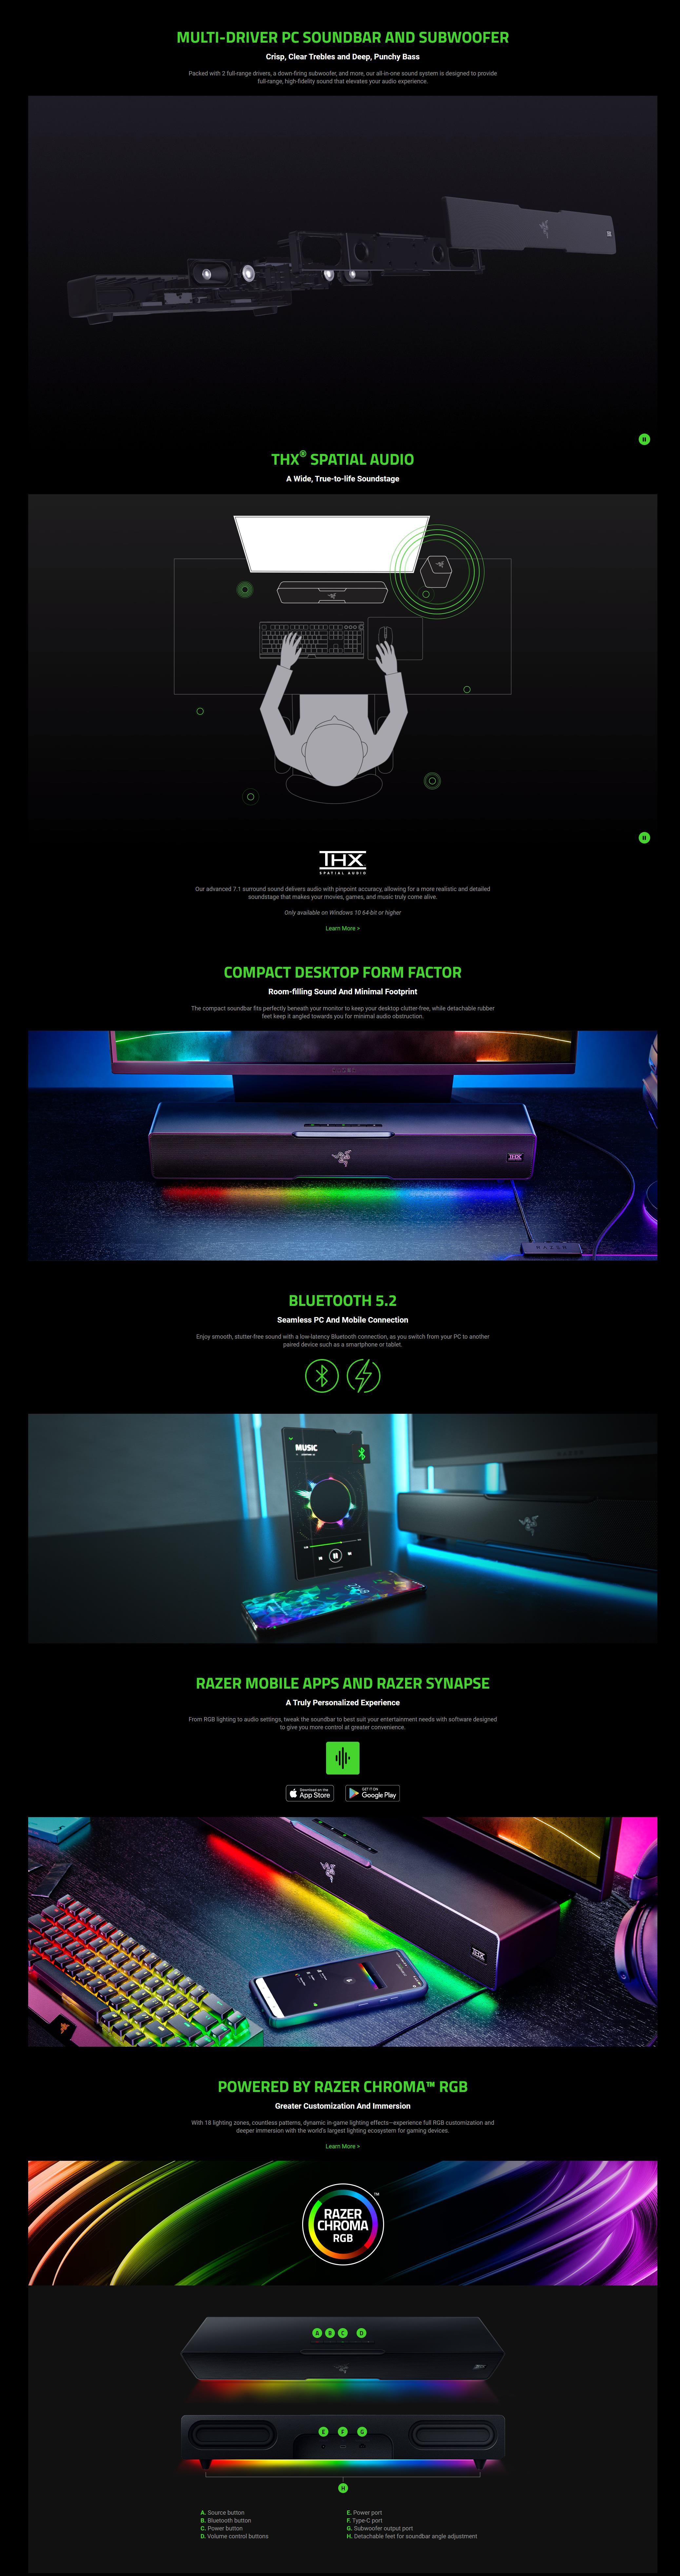 A large marketing image providing additional information about the product Razer Leviathan V2 Bluetooth Soundbar with Subwoofer - Additional alt info not provided